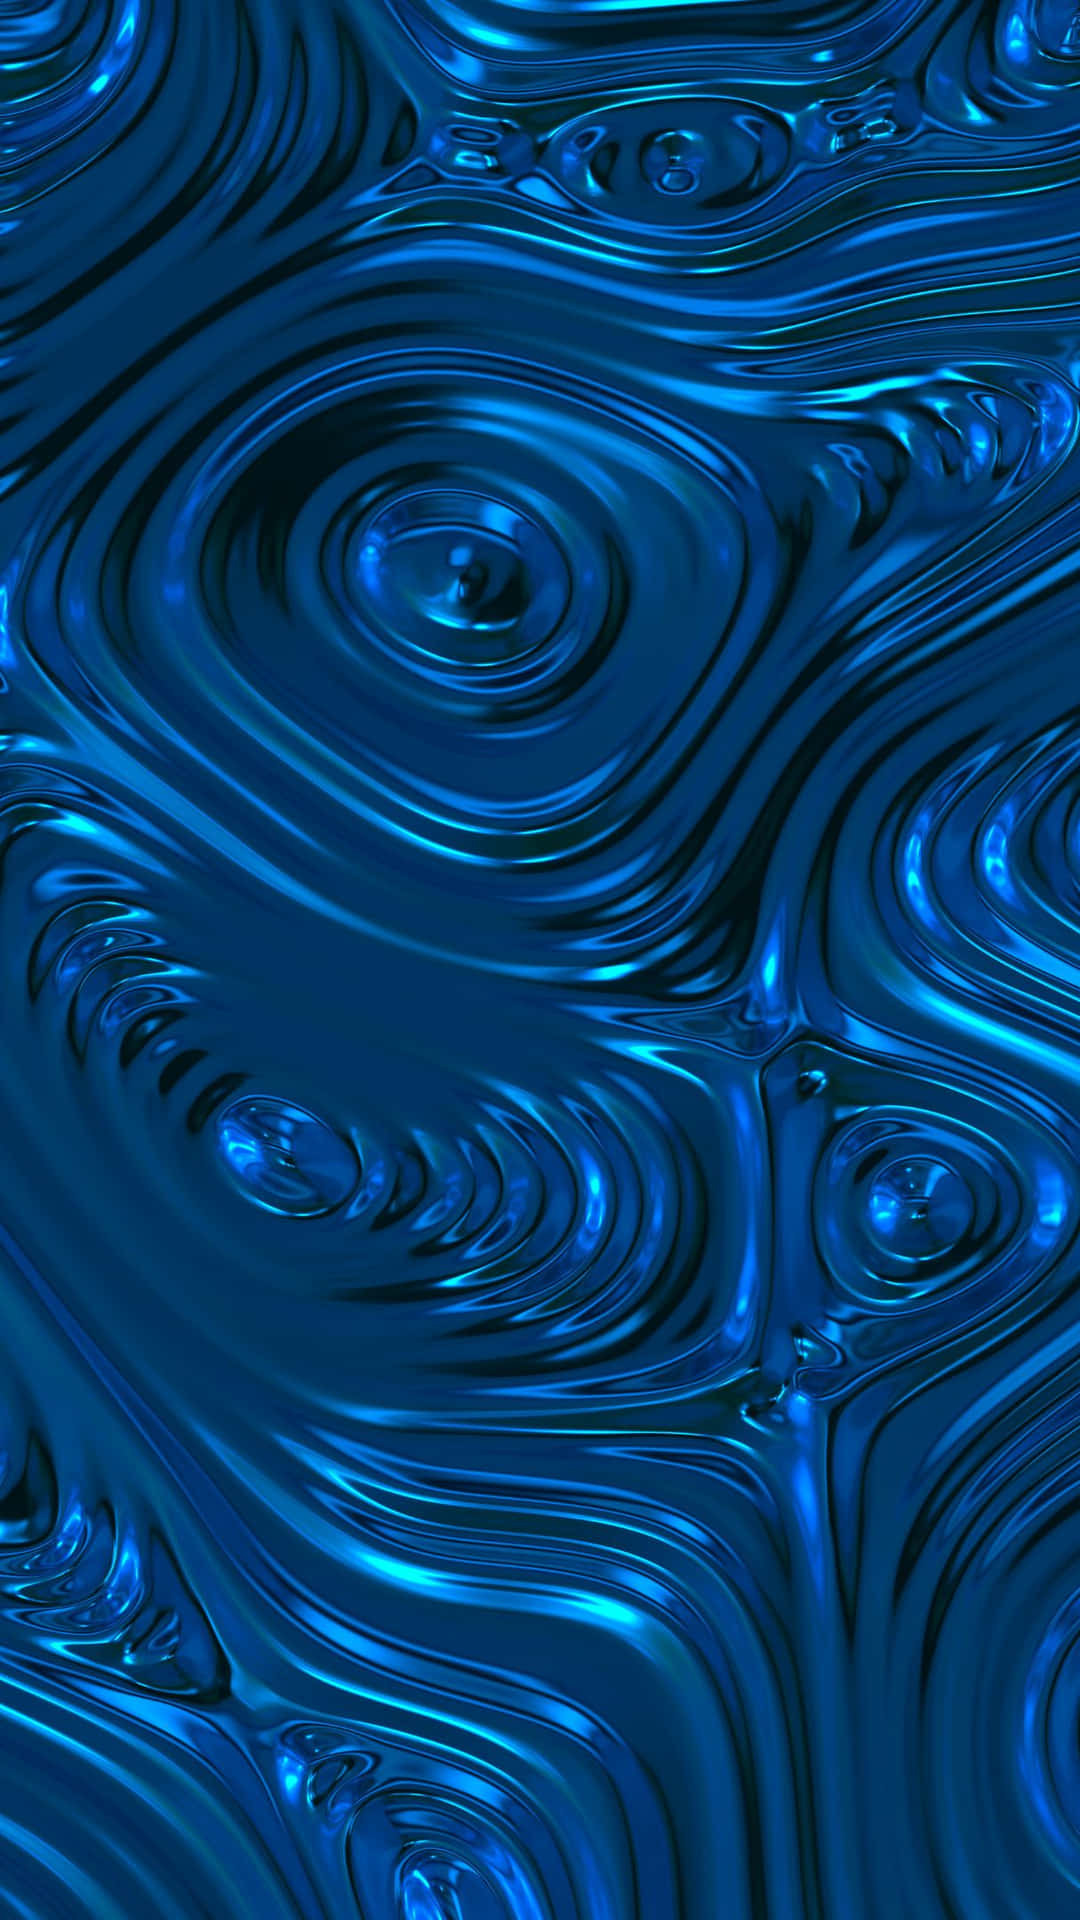 Bright blue swirling background